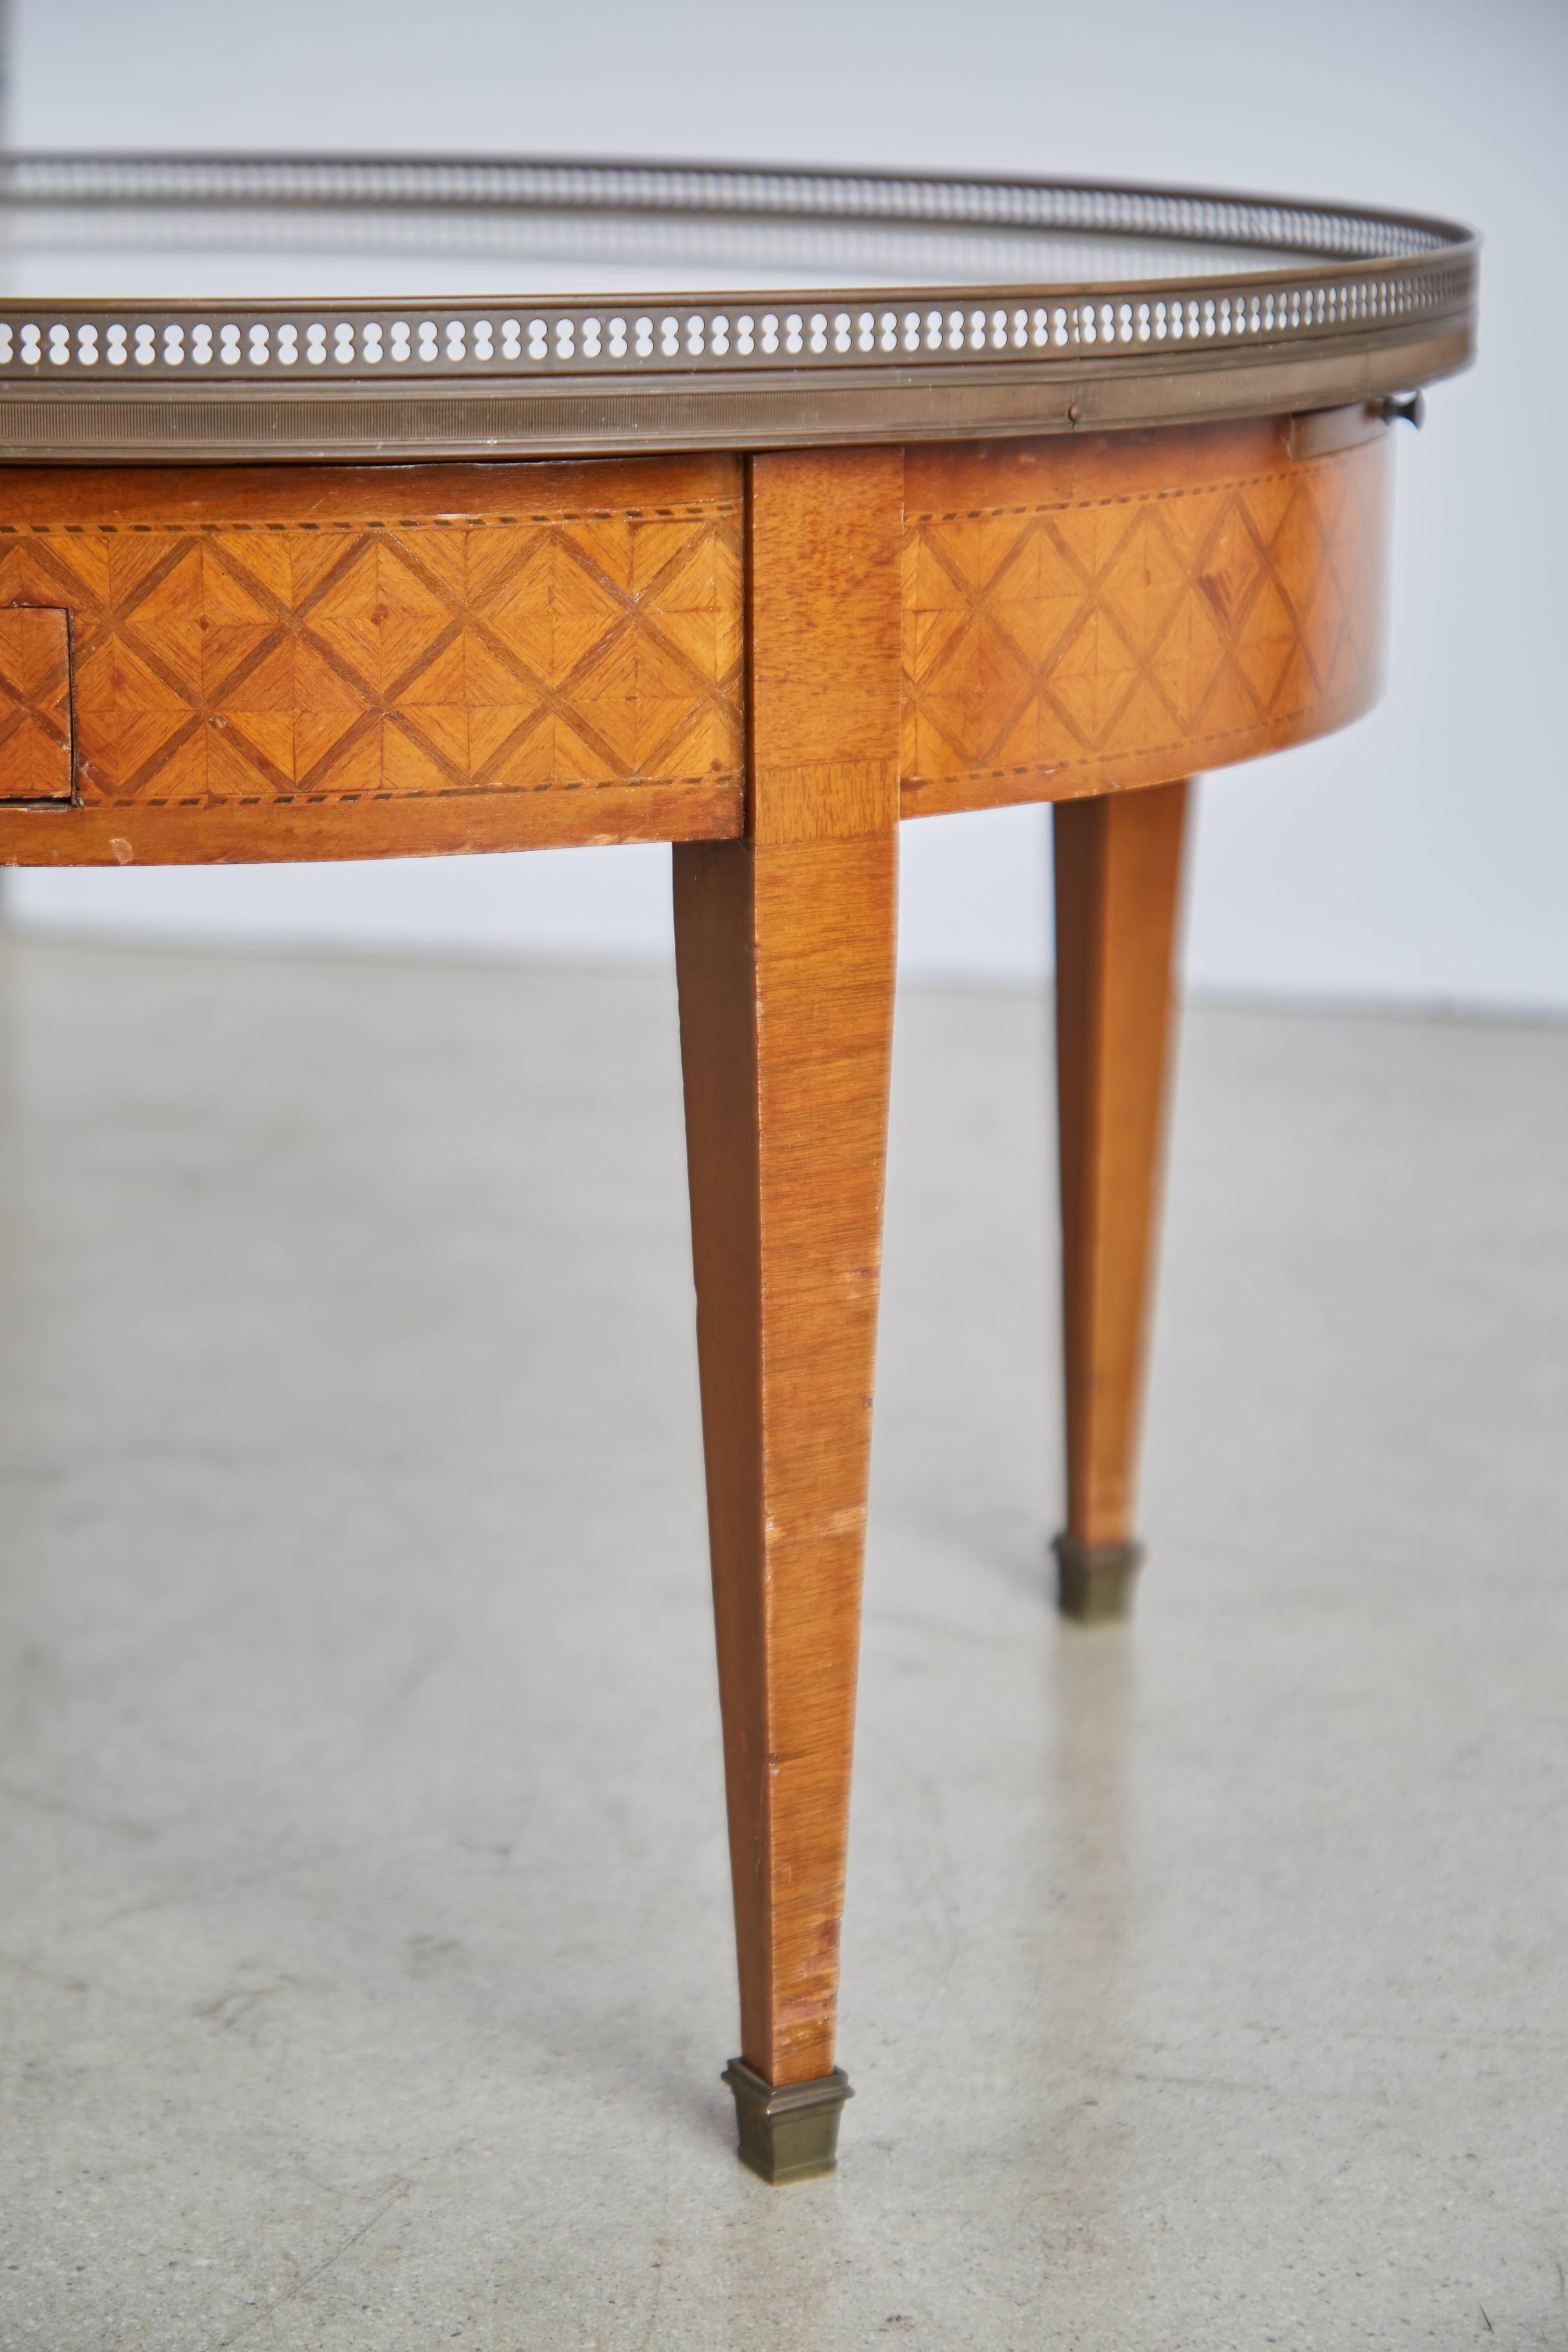 Embossed French Parquet Bouillotte Table with Marble Top, circa 1940